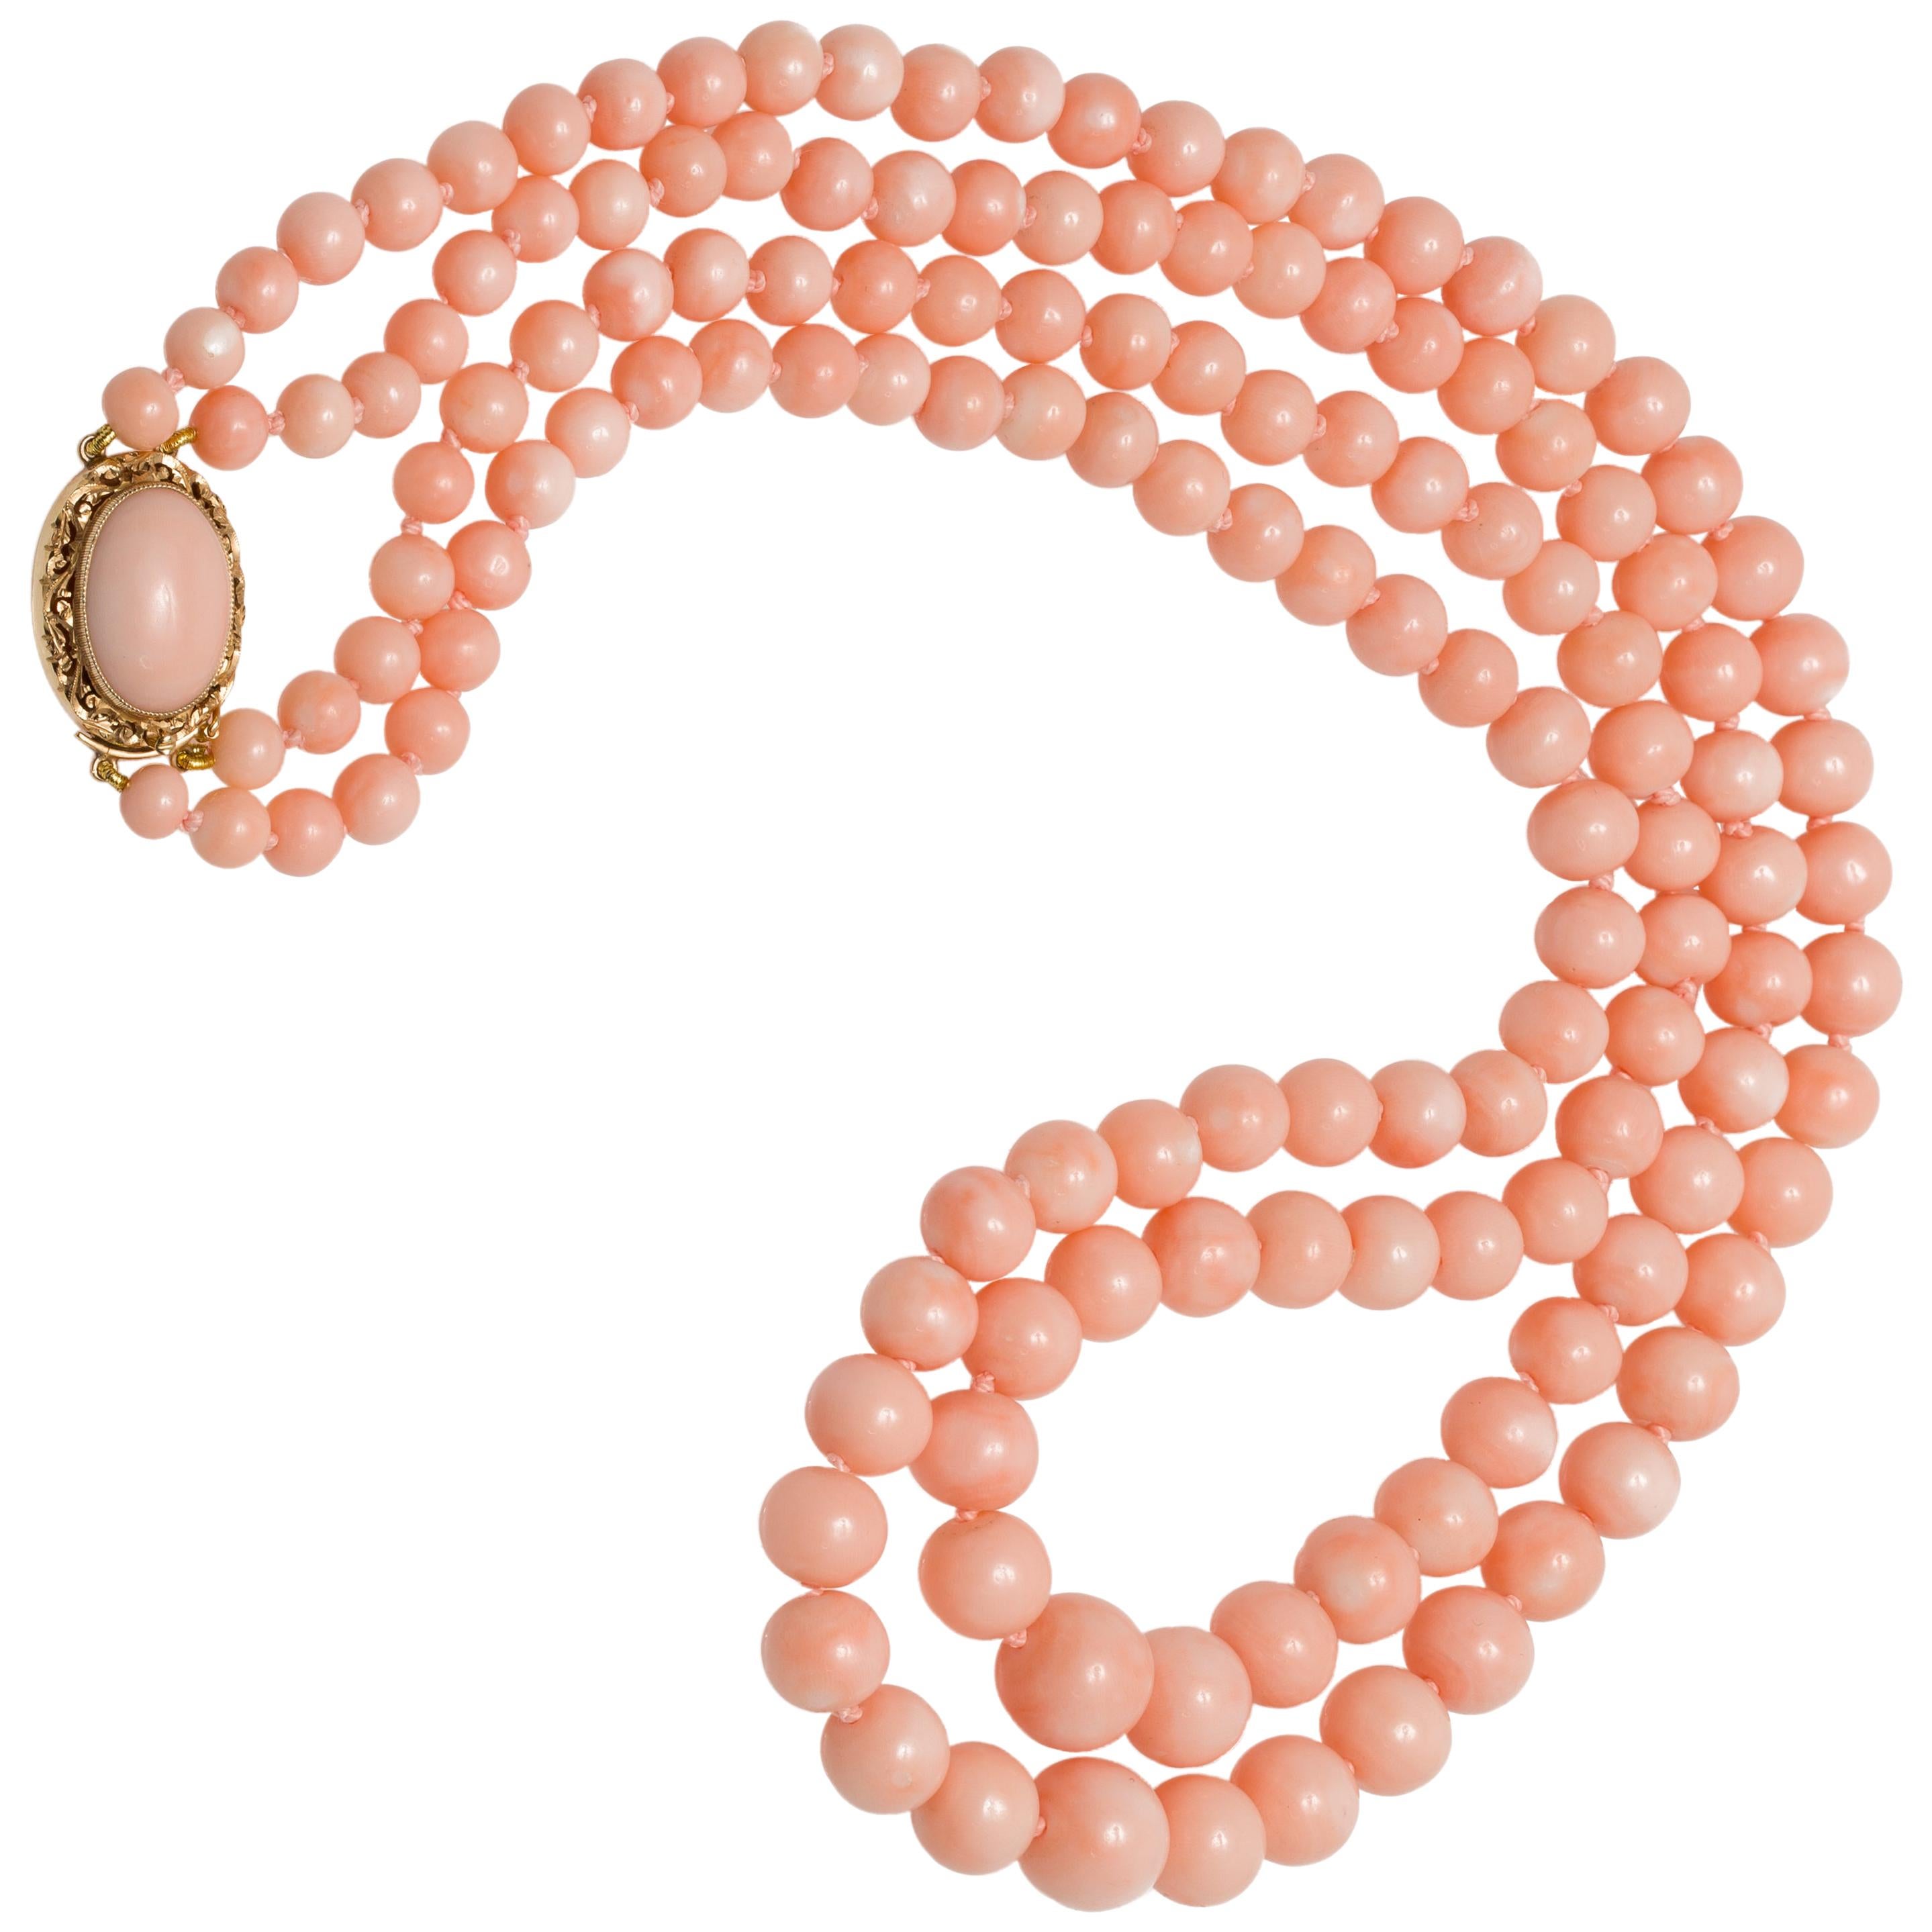 7mm round light pink coral beads,7mm and 3mm golden beads and 14k clasp Vintage bracelet 7L vintage handmade